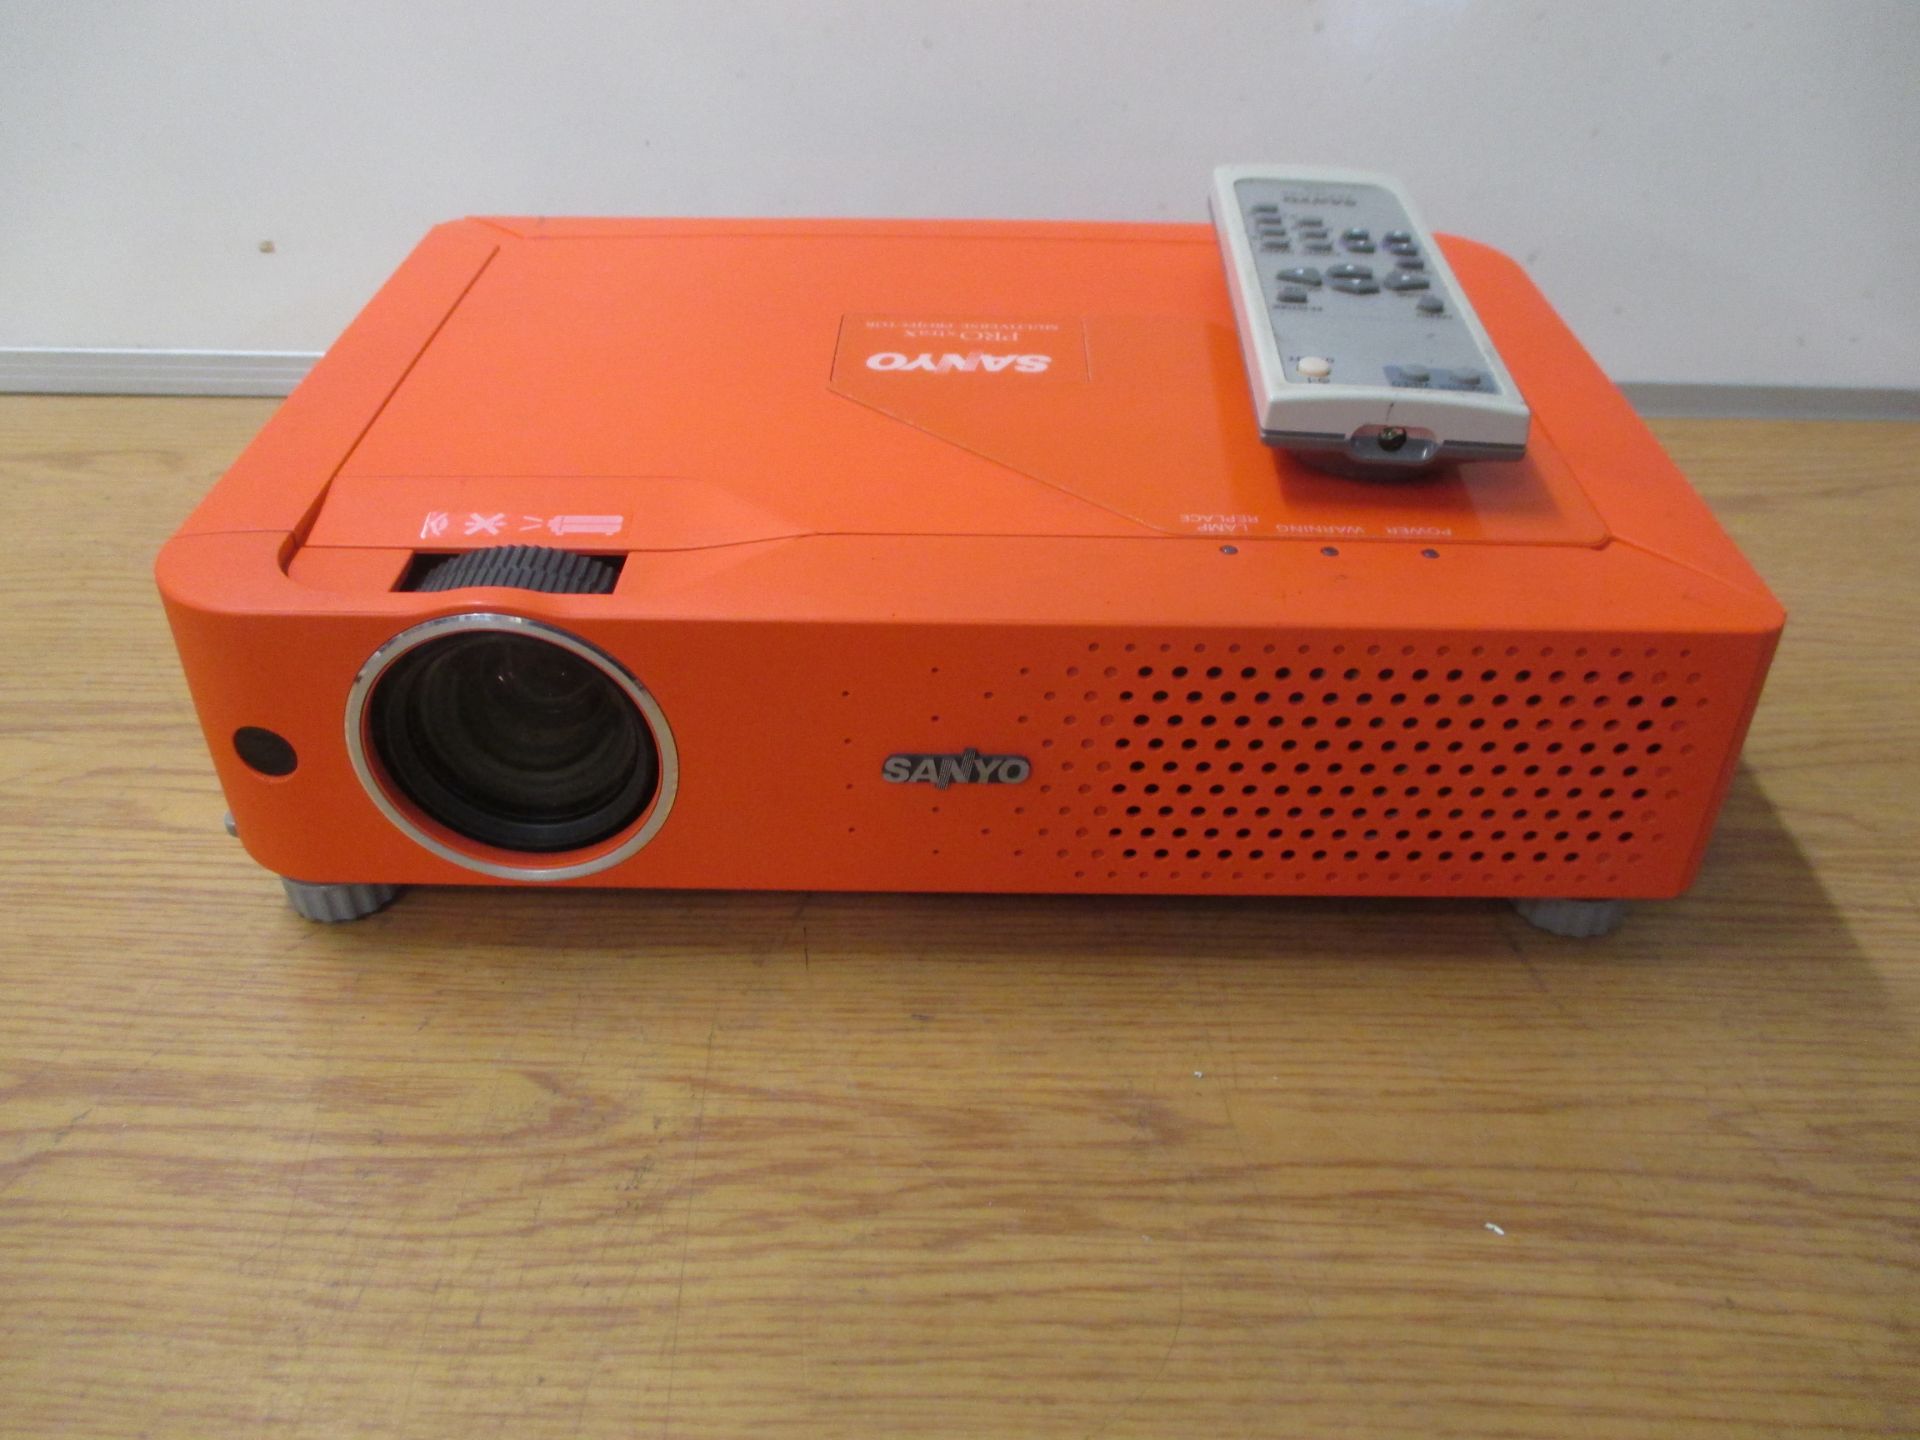 SANYO PRO xtraX Multiverse Projector. Model PLC-XE31. With Remote Control. Showing 1138 Lamp Hours